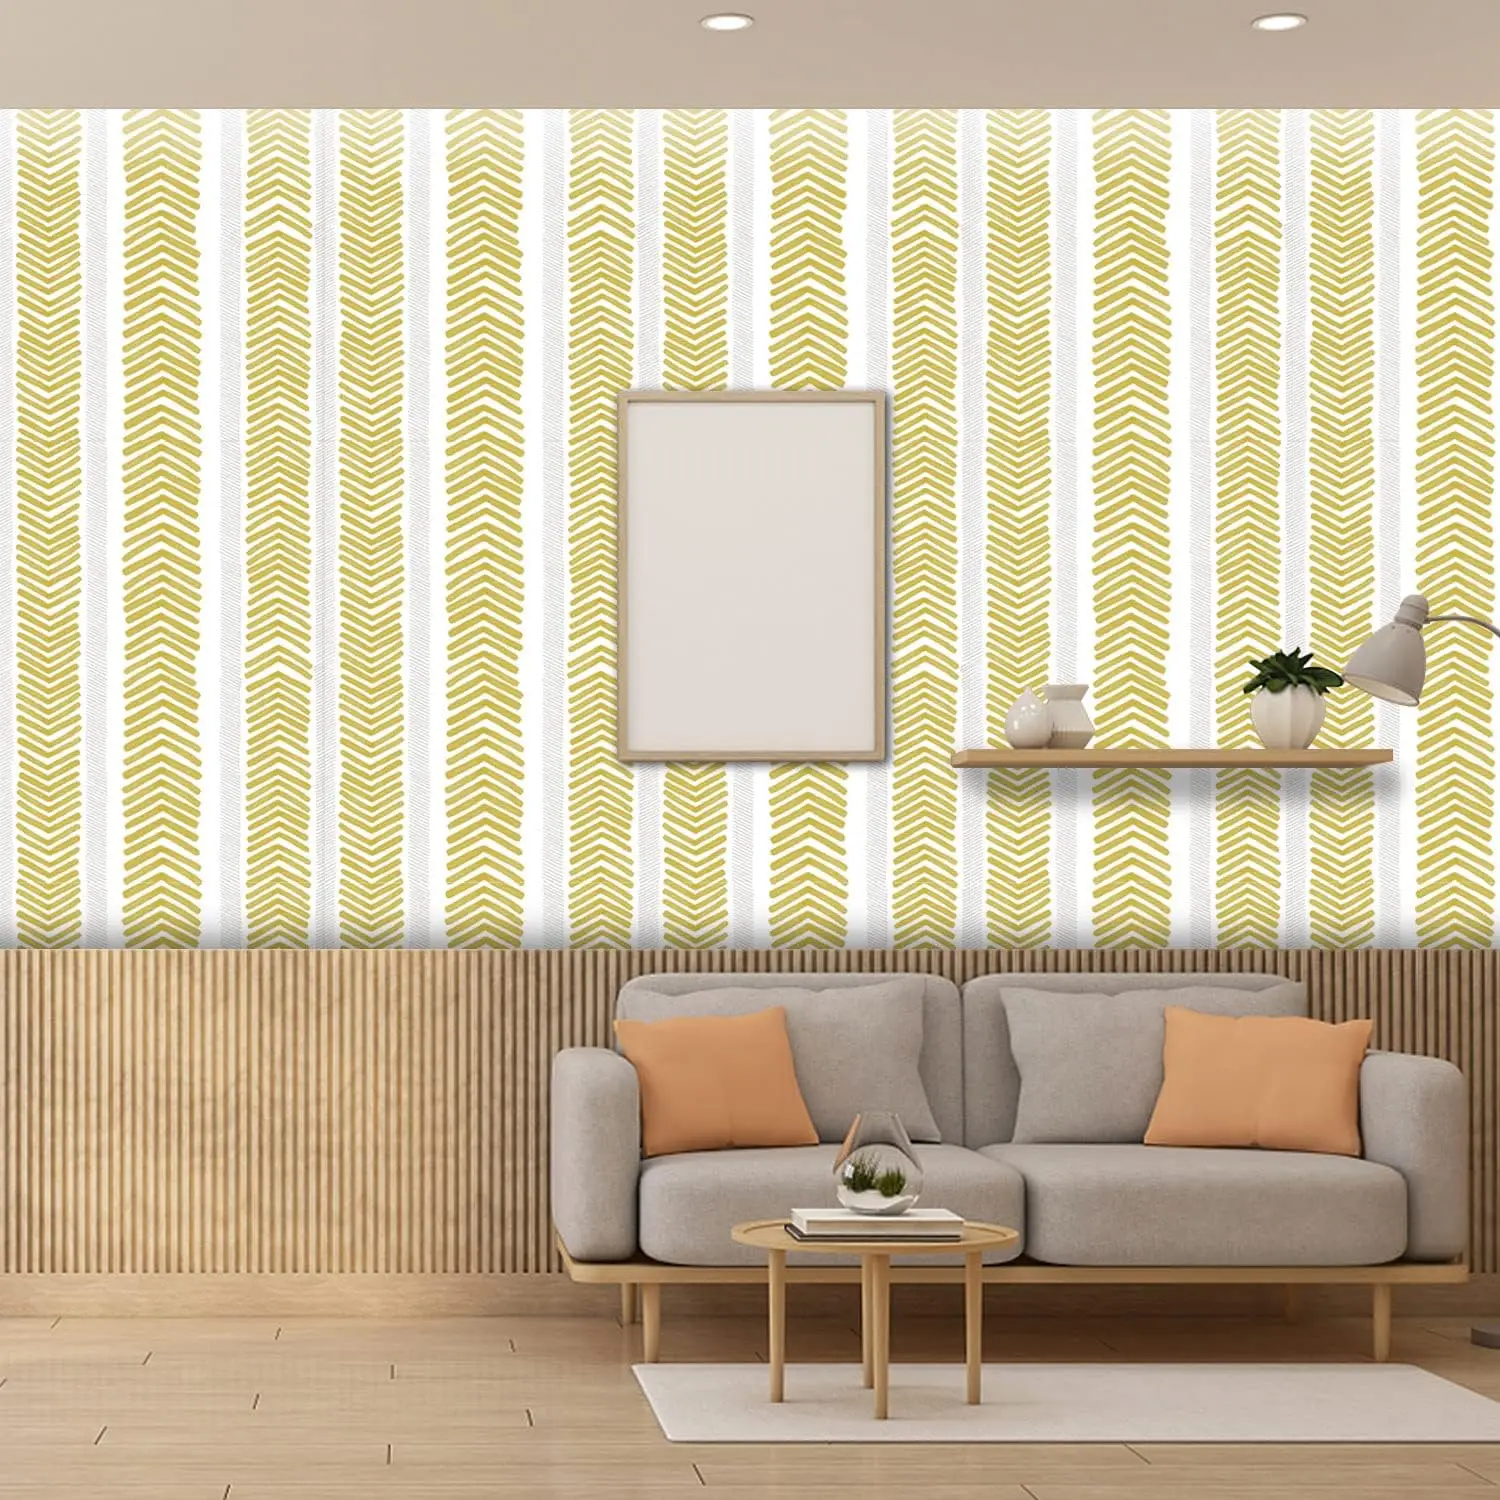 Modern Herringbone Peel and stick Wallpaper Gold and White Contact